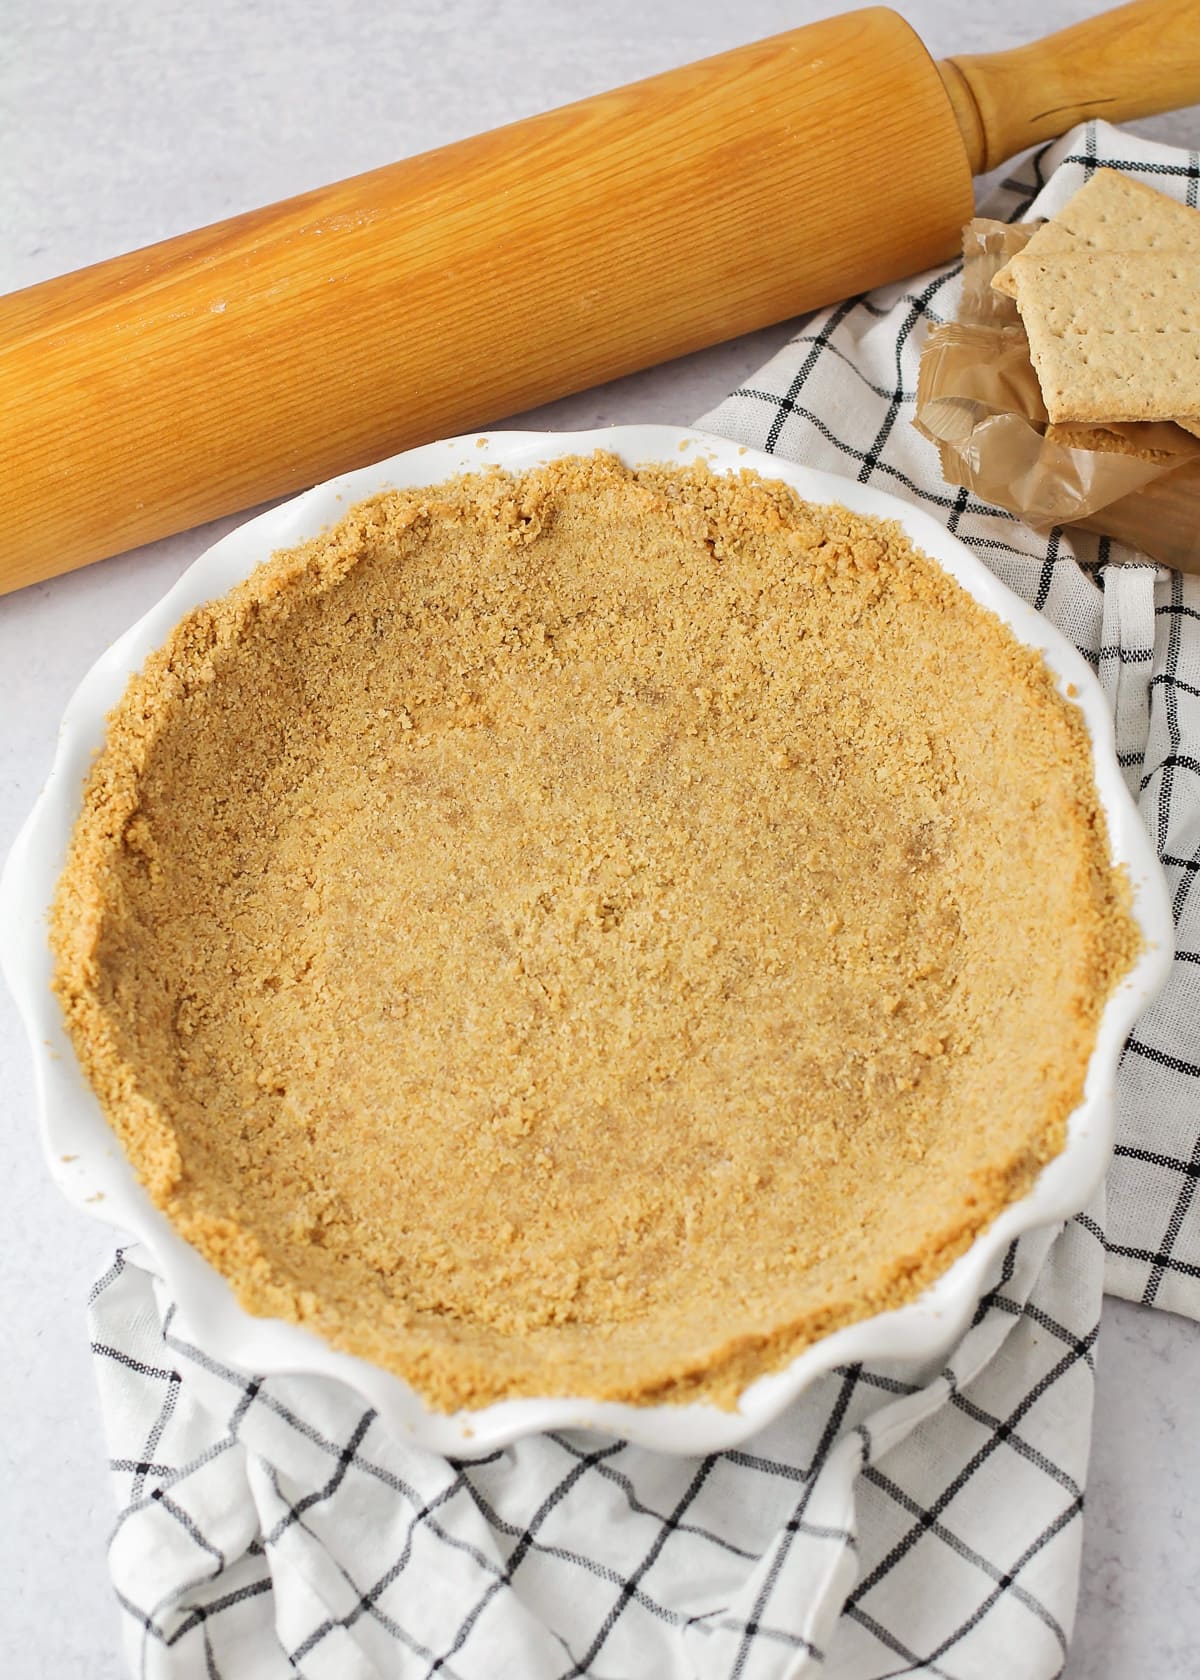 Top view of a pressed graham cracker crust in a pie dish.